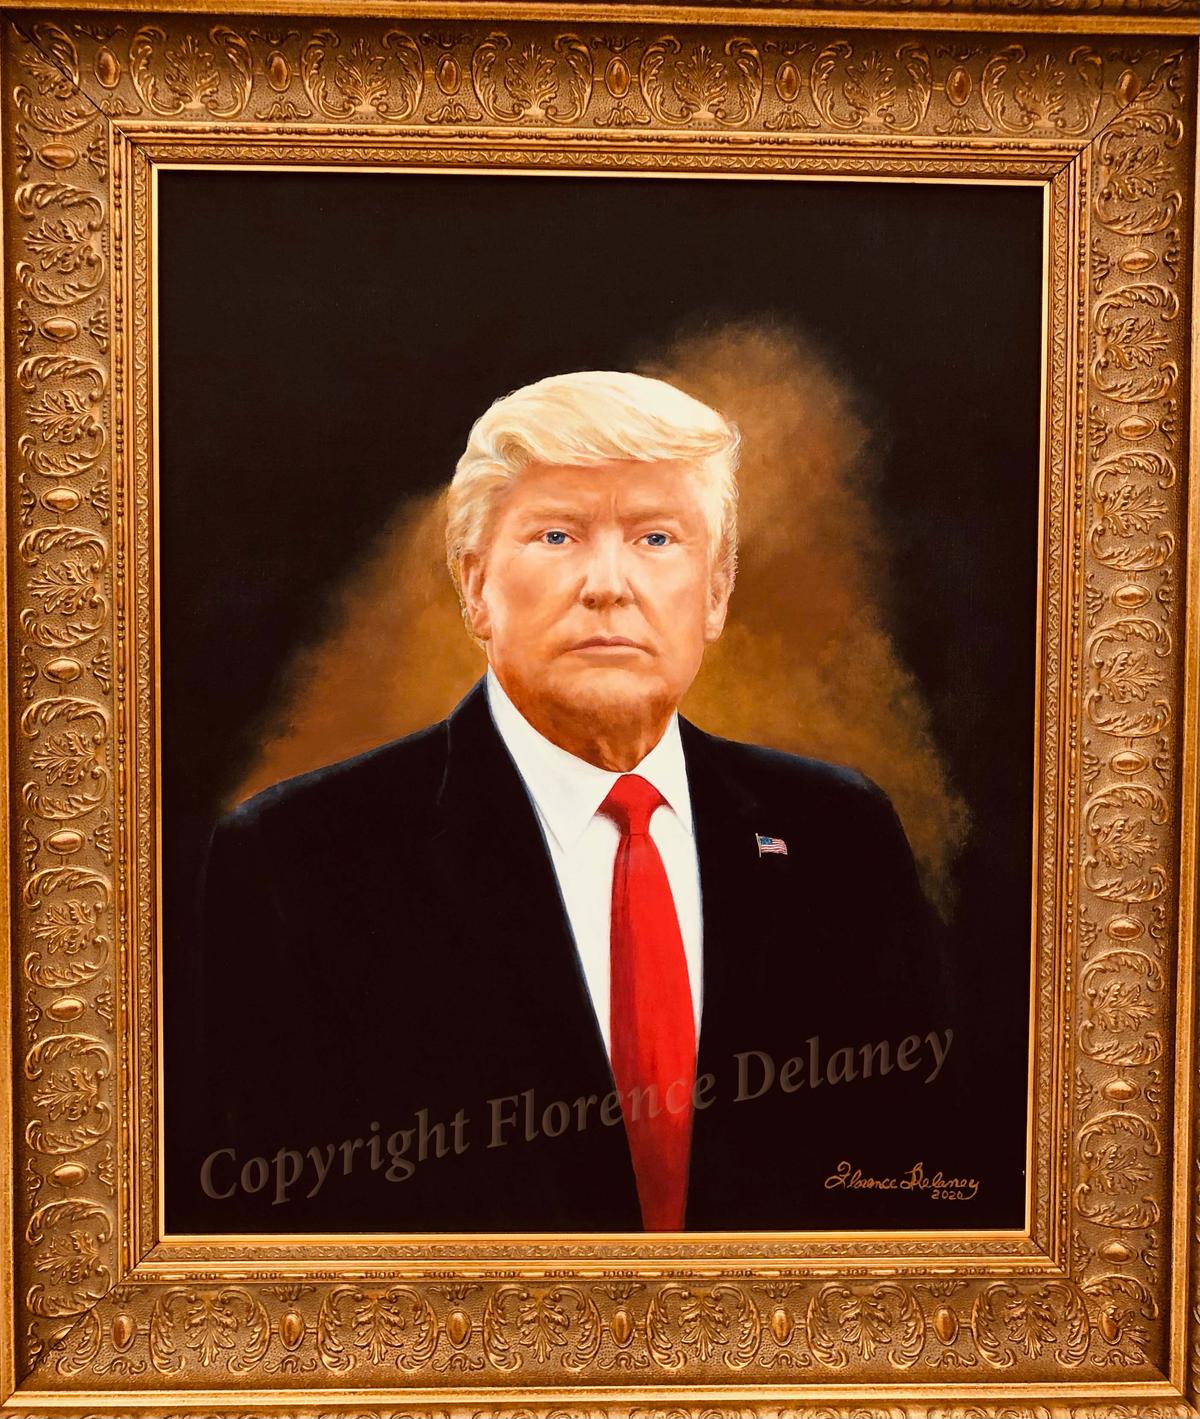 A portrait of Donald J. Trump by Florence Delaney. (Courtesy of Mona Shray)